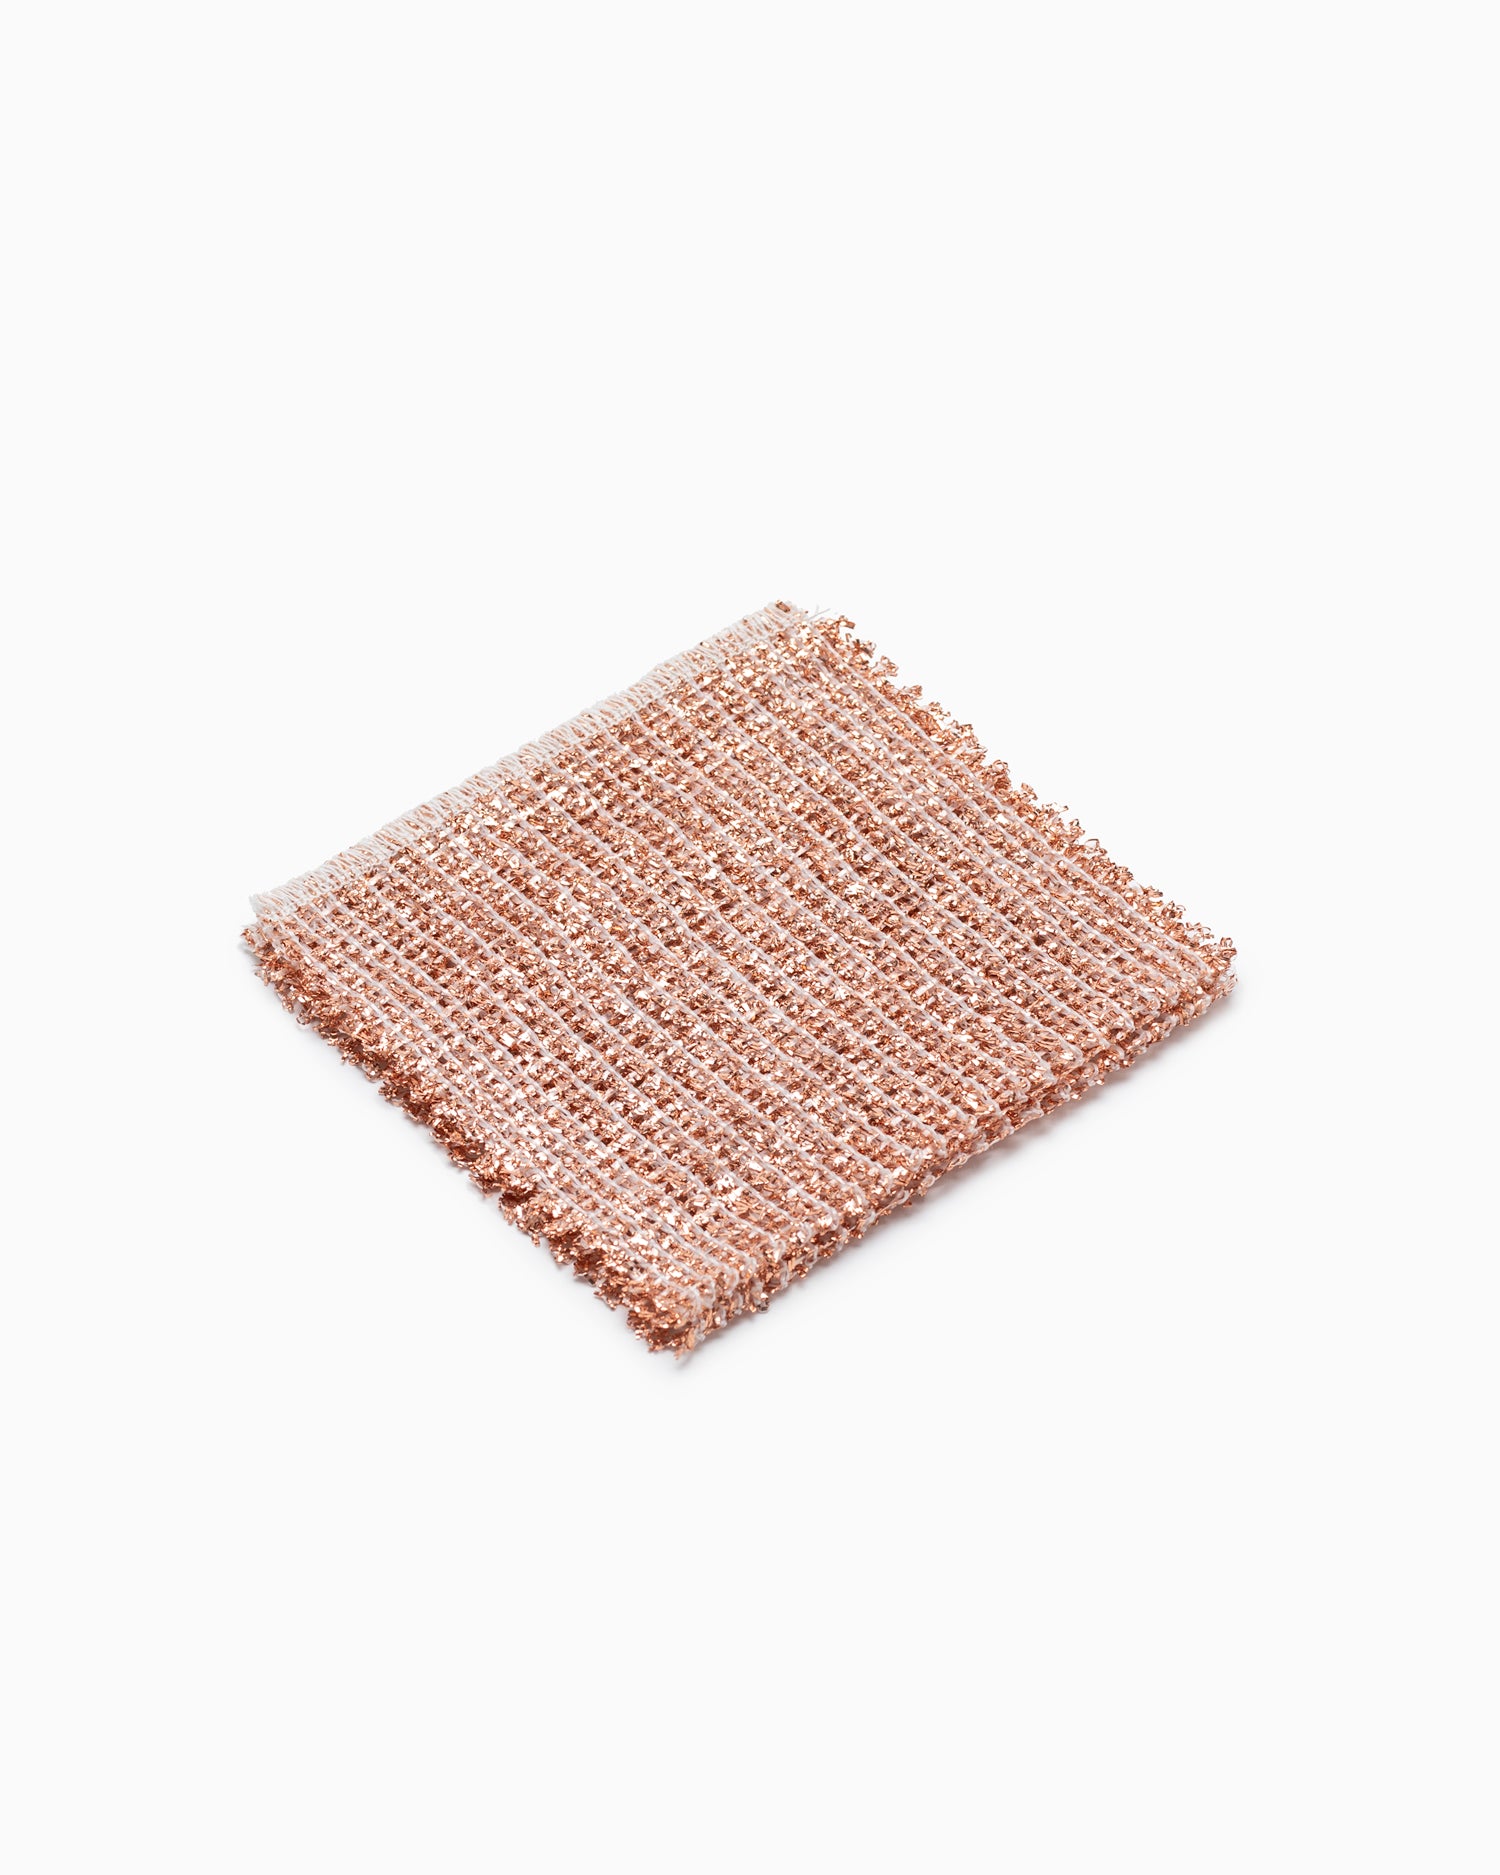 CopperSpa Tub Mat, 2-pack